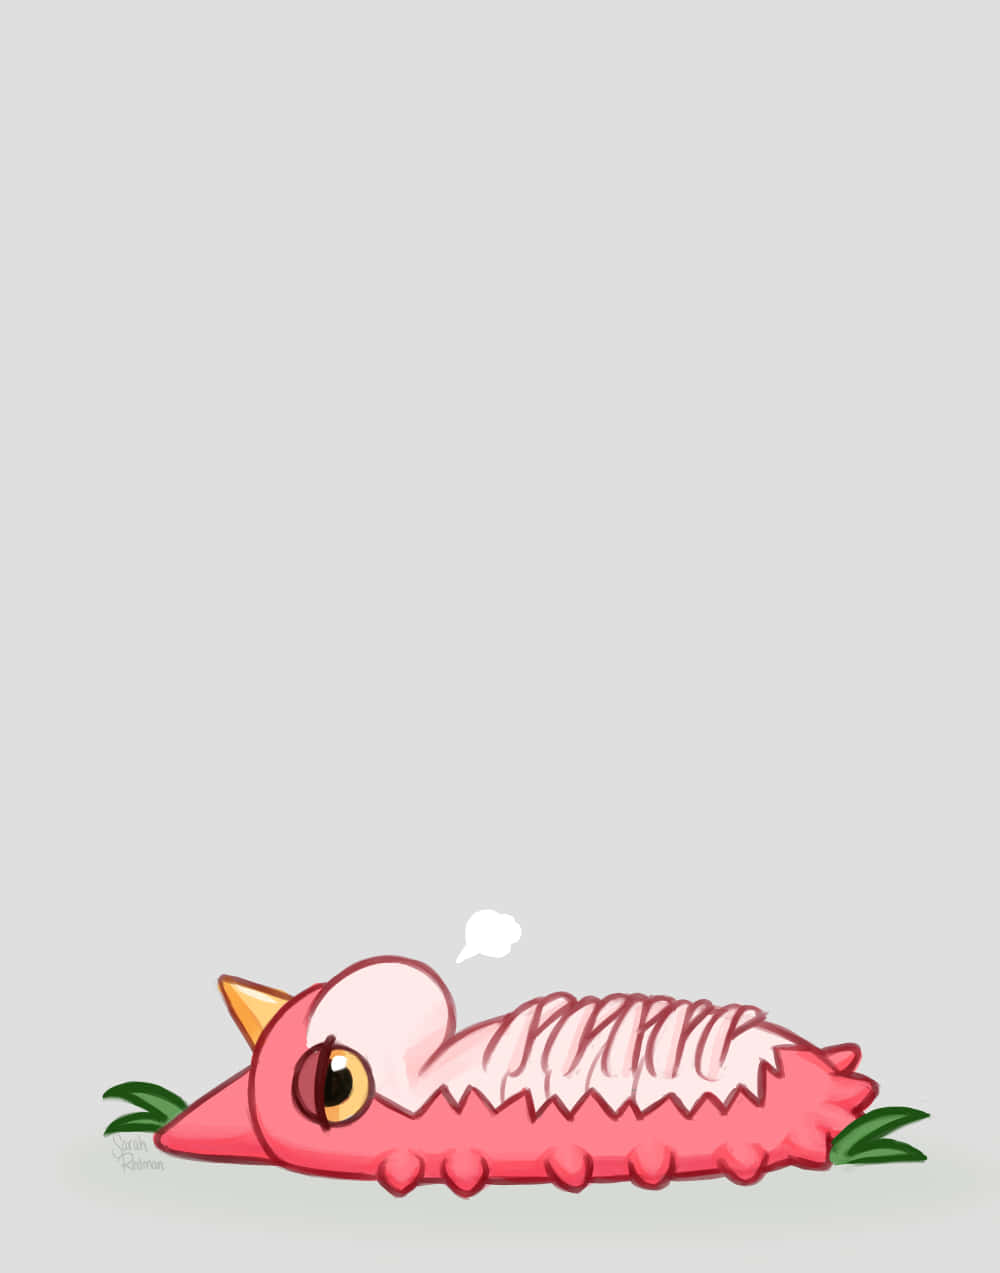 Tired Wurmple Letting Out A Sigh Wallpaper